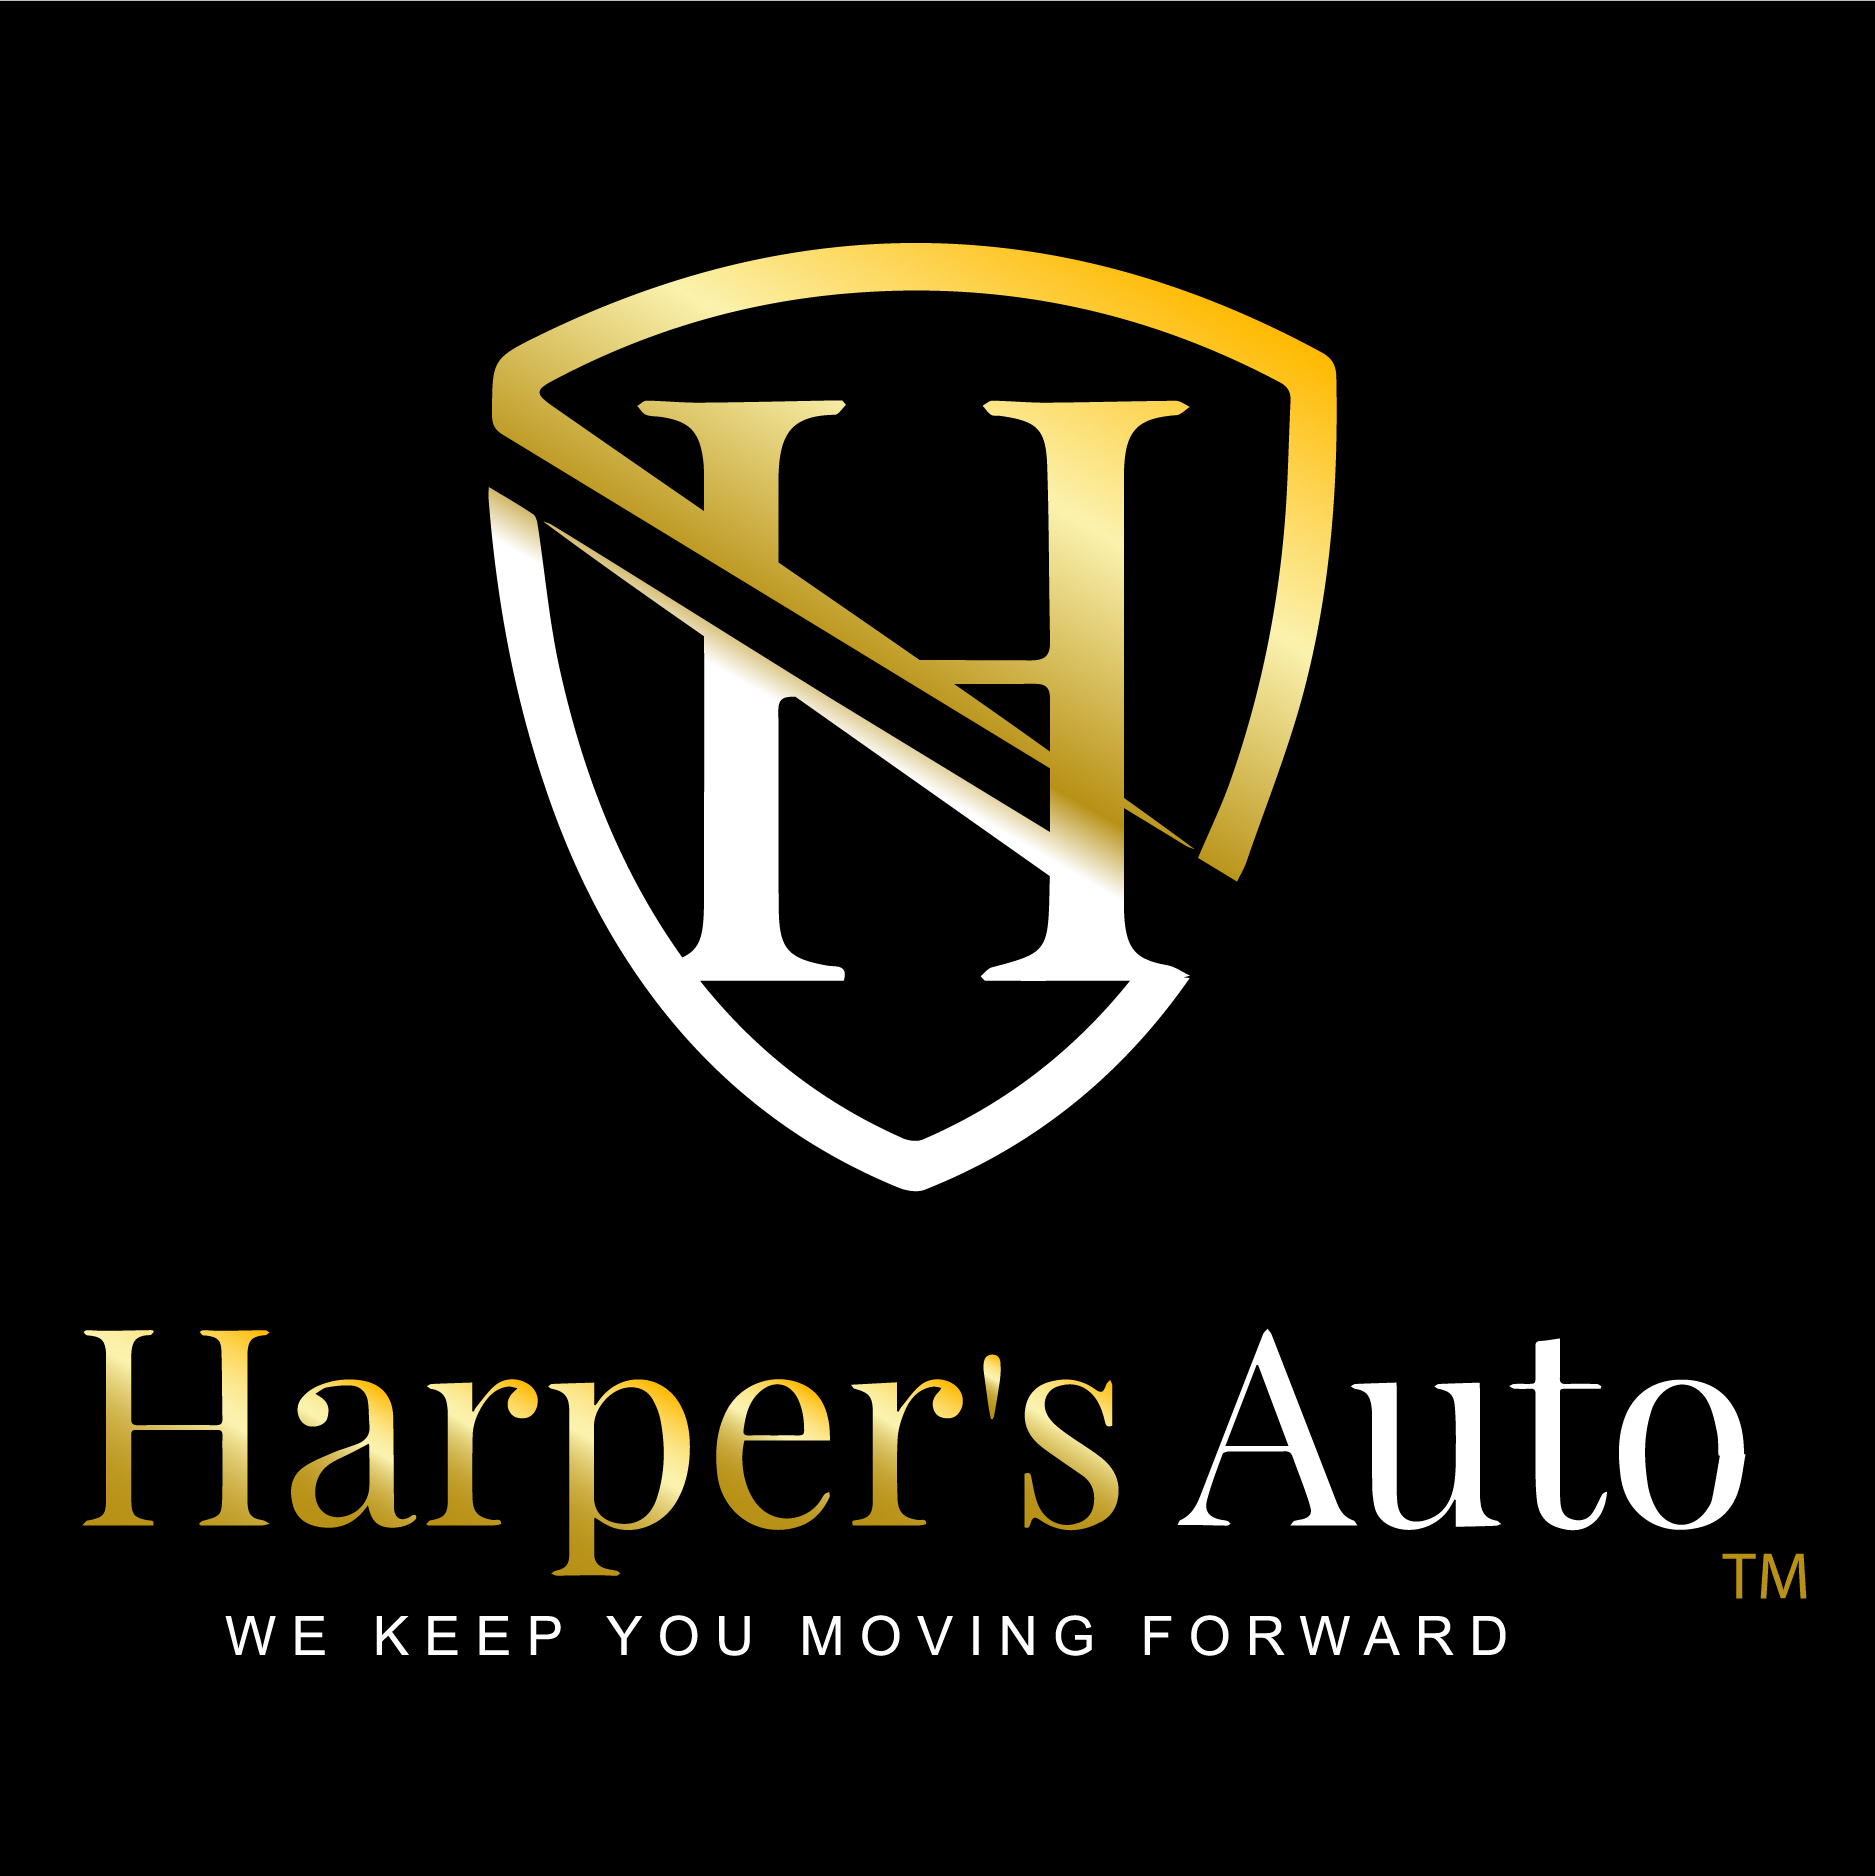 The final Harper's Auto logo in gold and white on black background